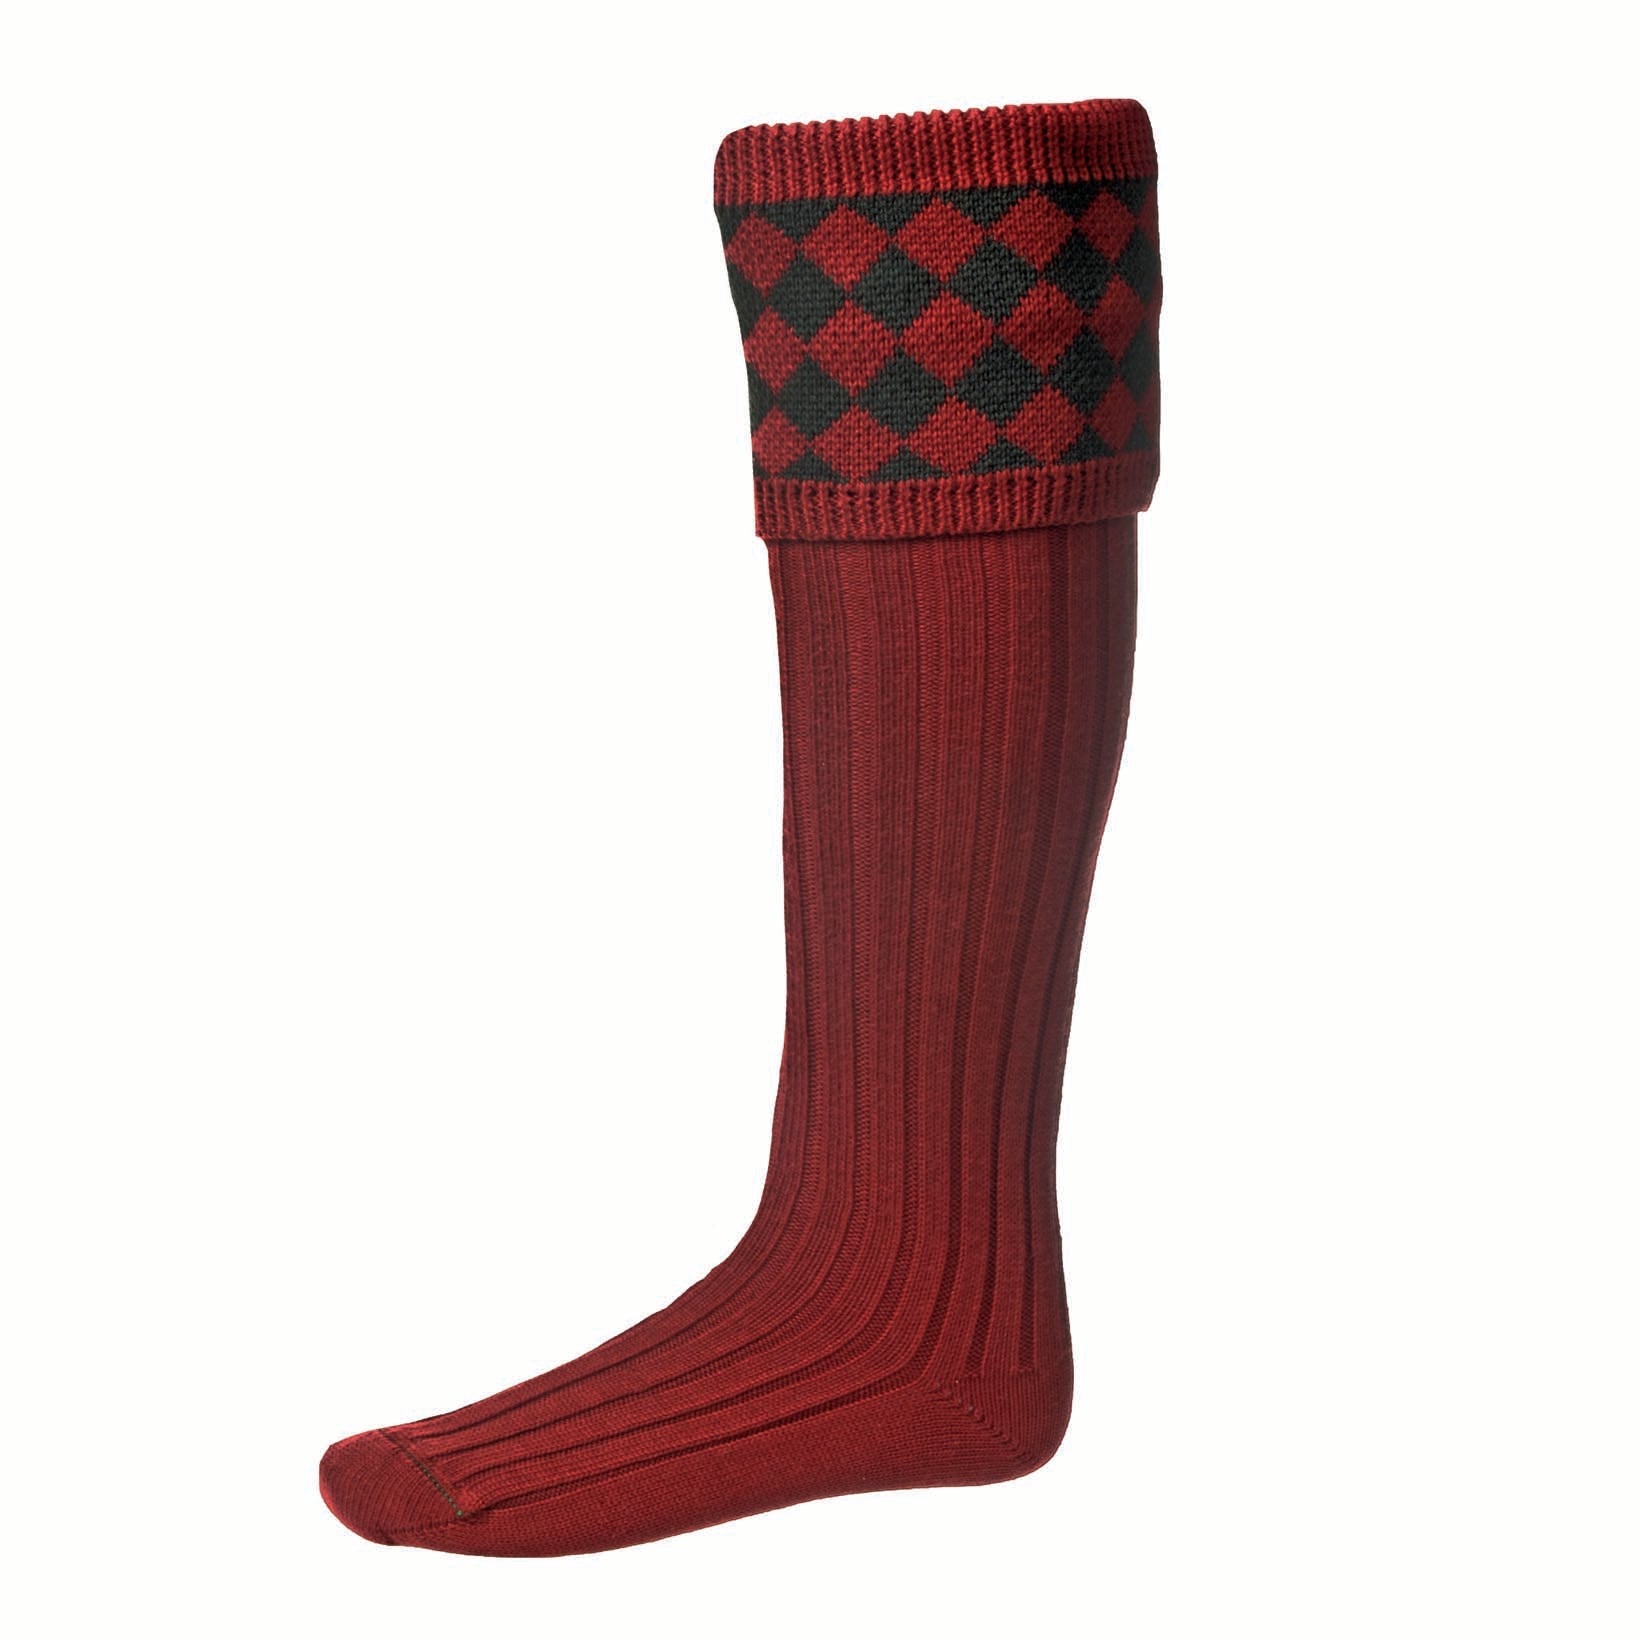 Chessboard Sock-House of Cheviot-Conrad Hasselbach Shoes & Garment